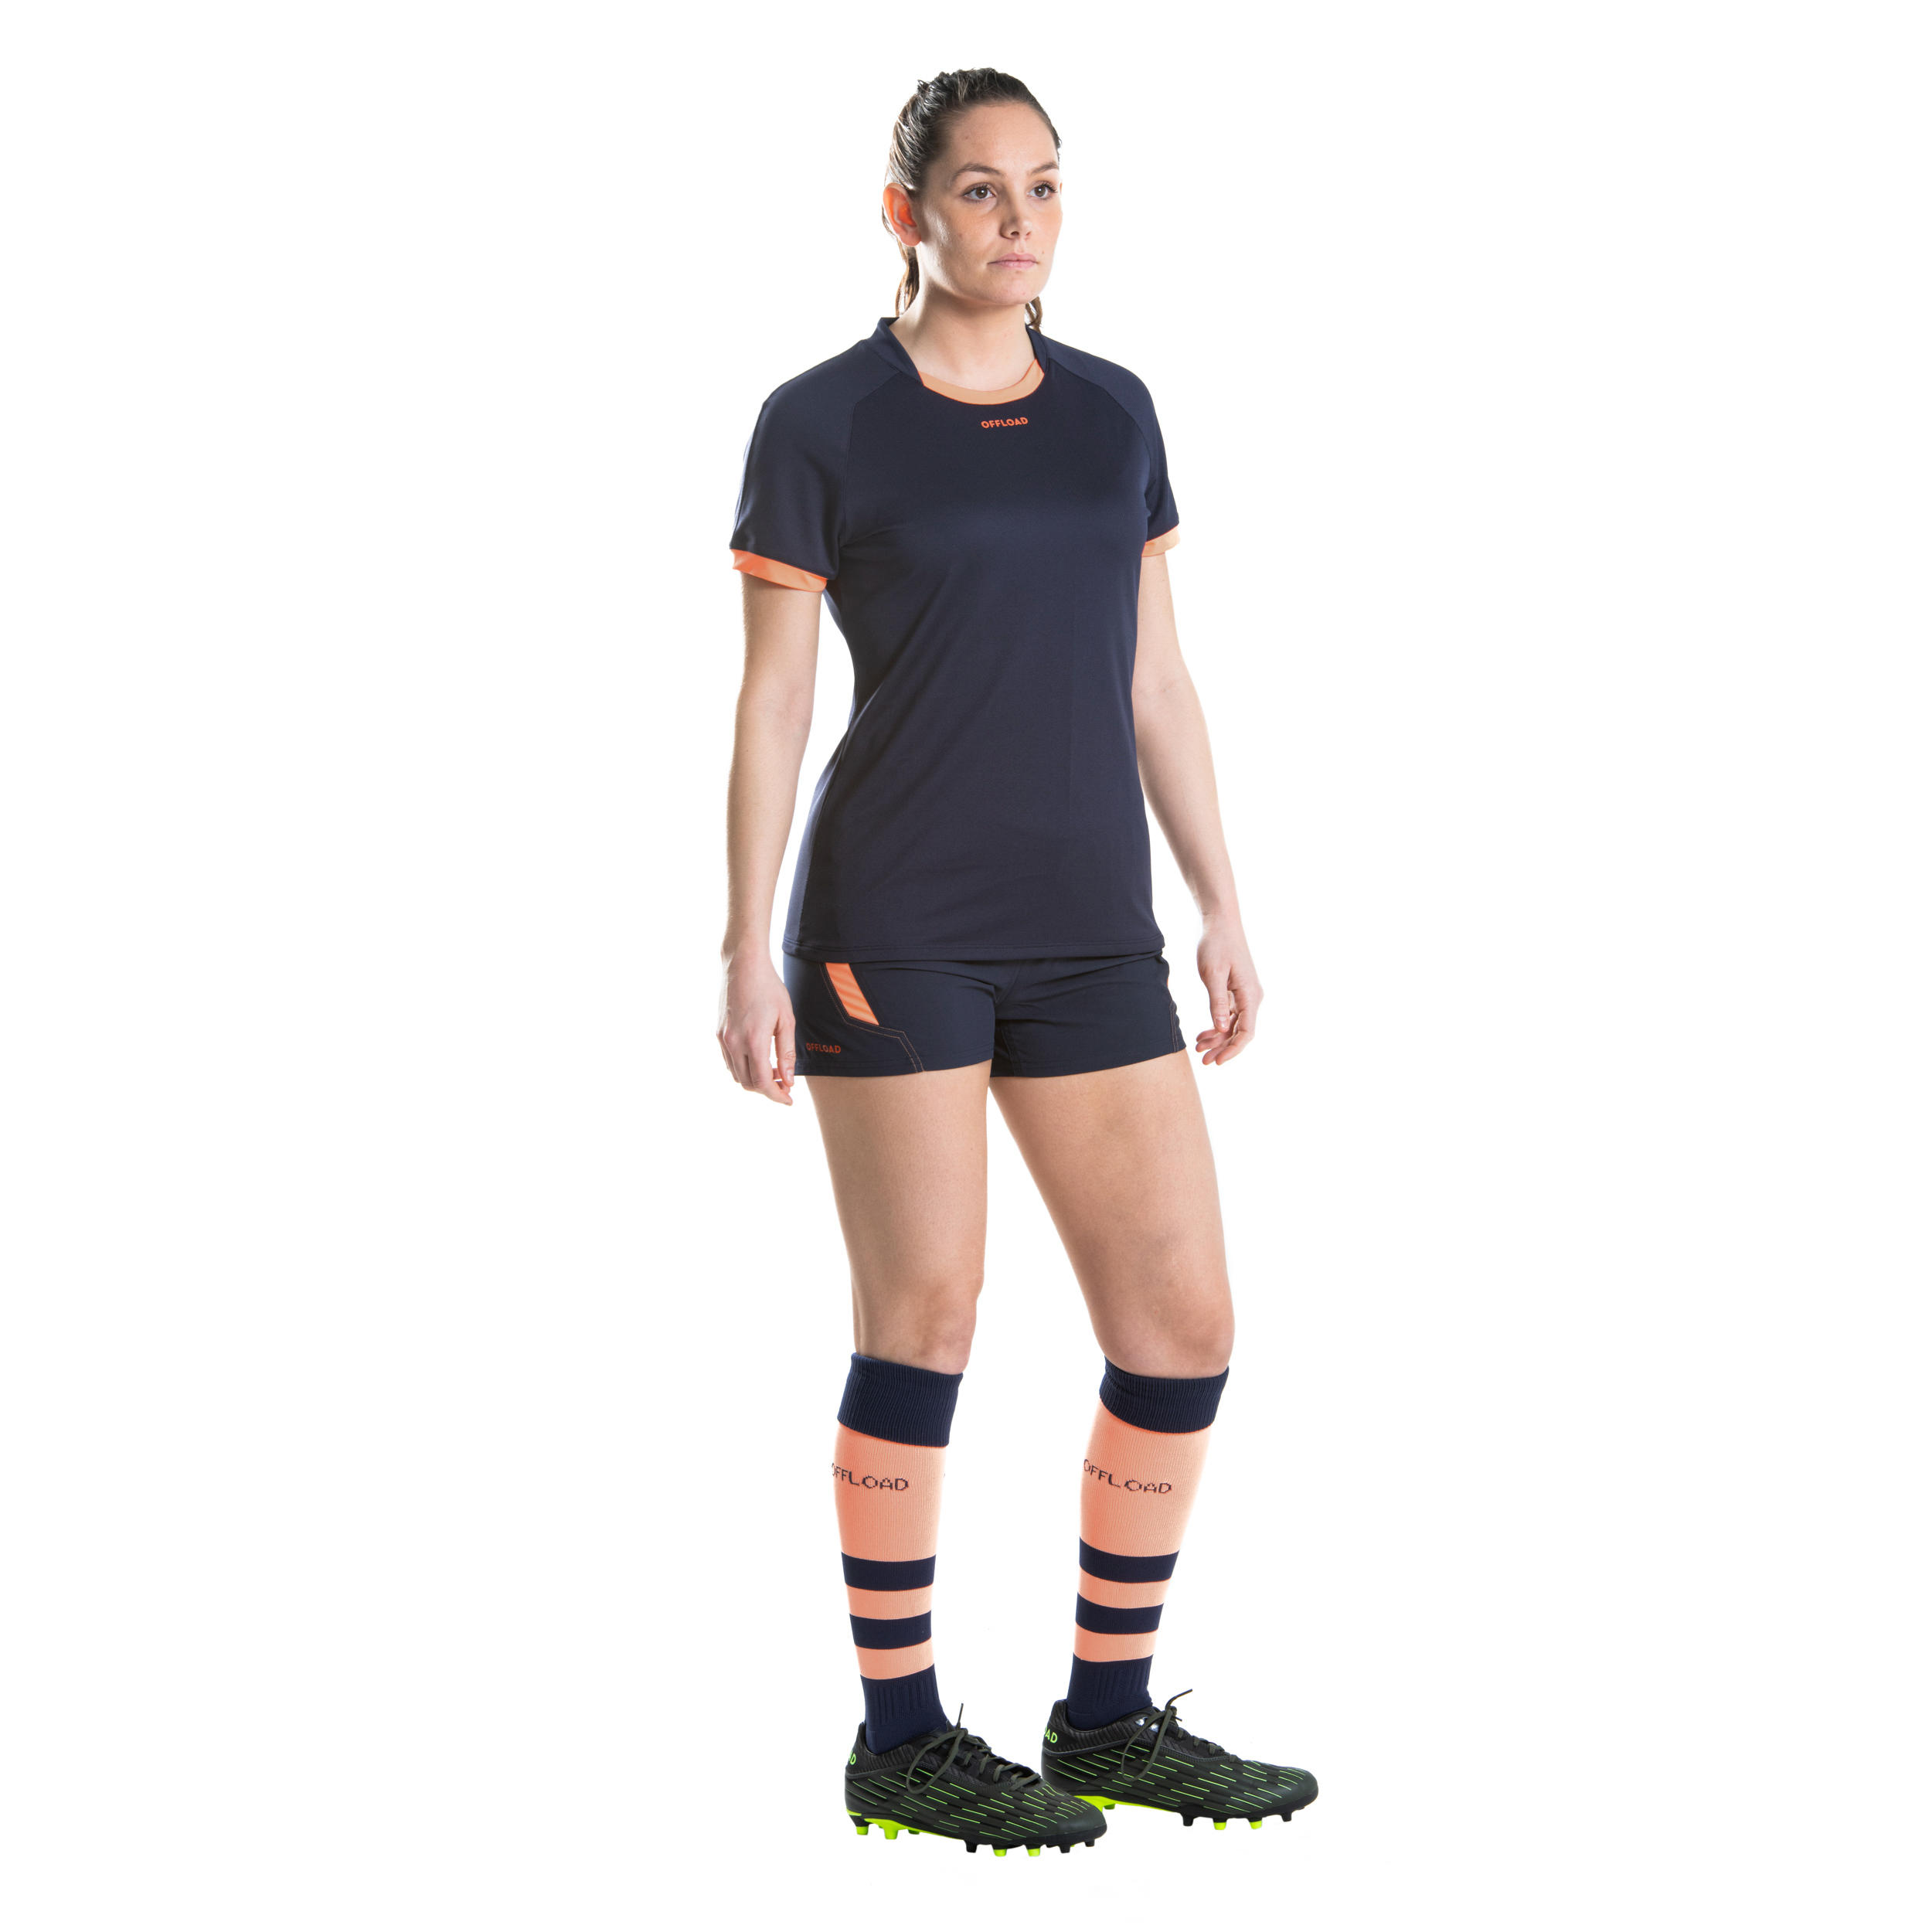 Women's Short-Sleeved Rugby Jersey R100 - Navy Blue/Coral 7/7